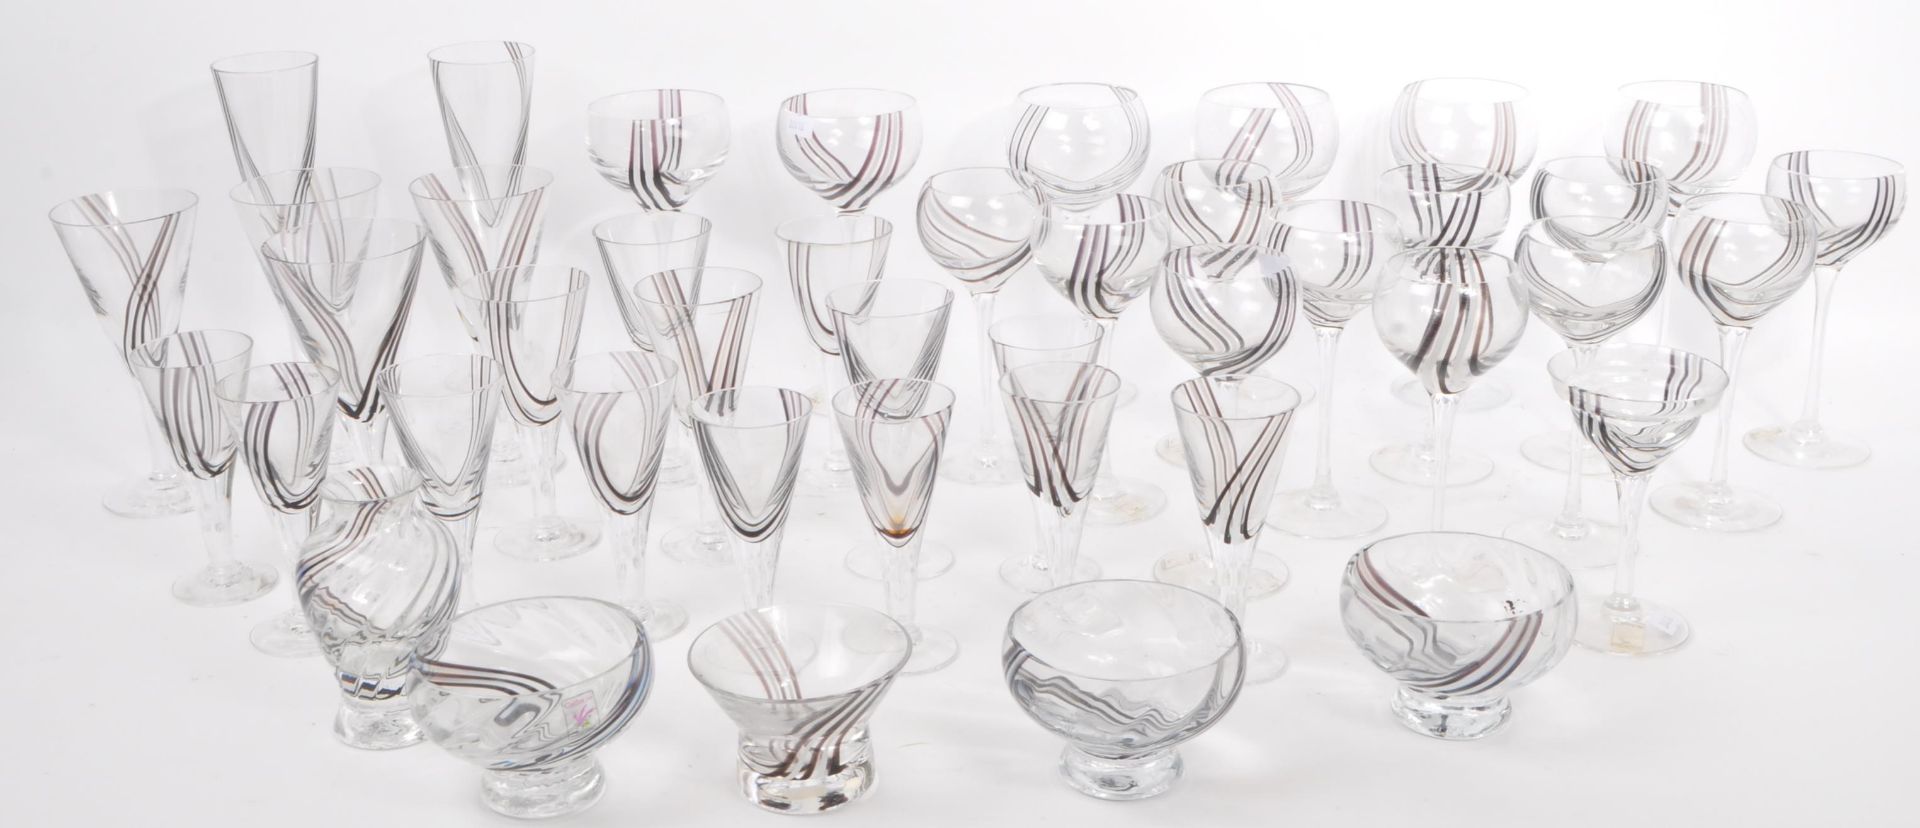 COLLECTION OF CAITHNESS CRYSTAL GLASSES - PANACHE PATTERN